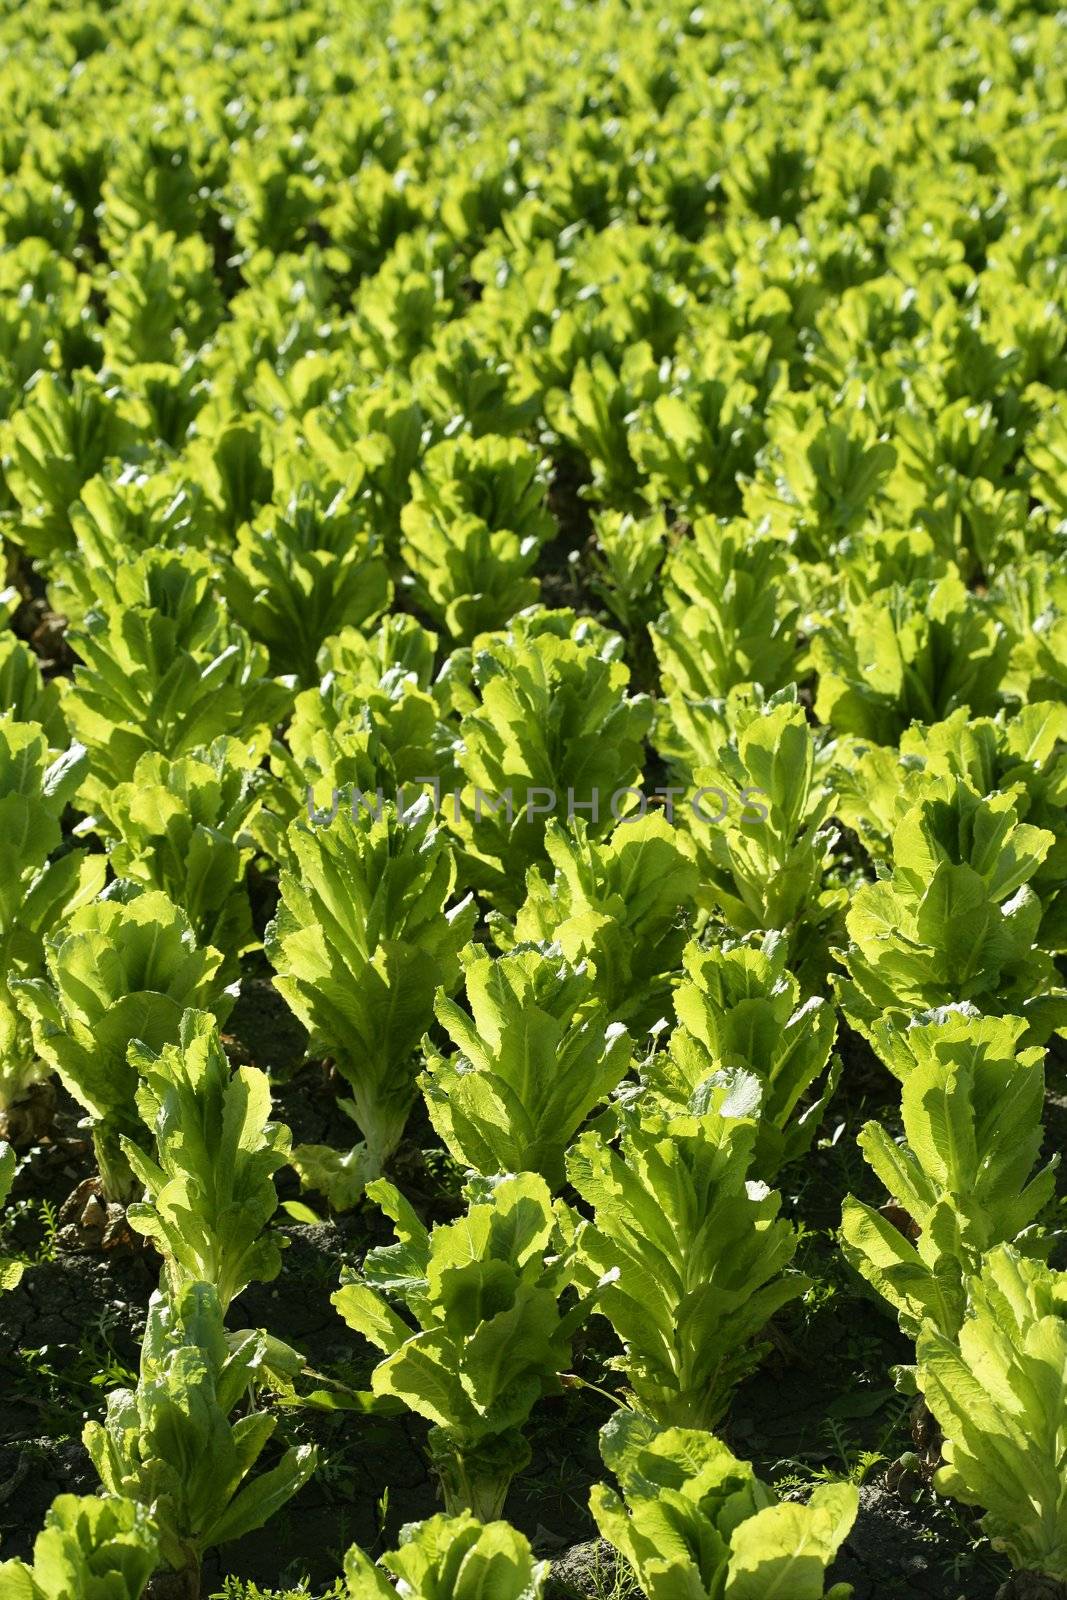 Green lettuce country in Spain. Sunny day outdoors